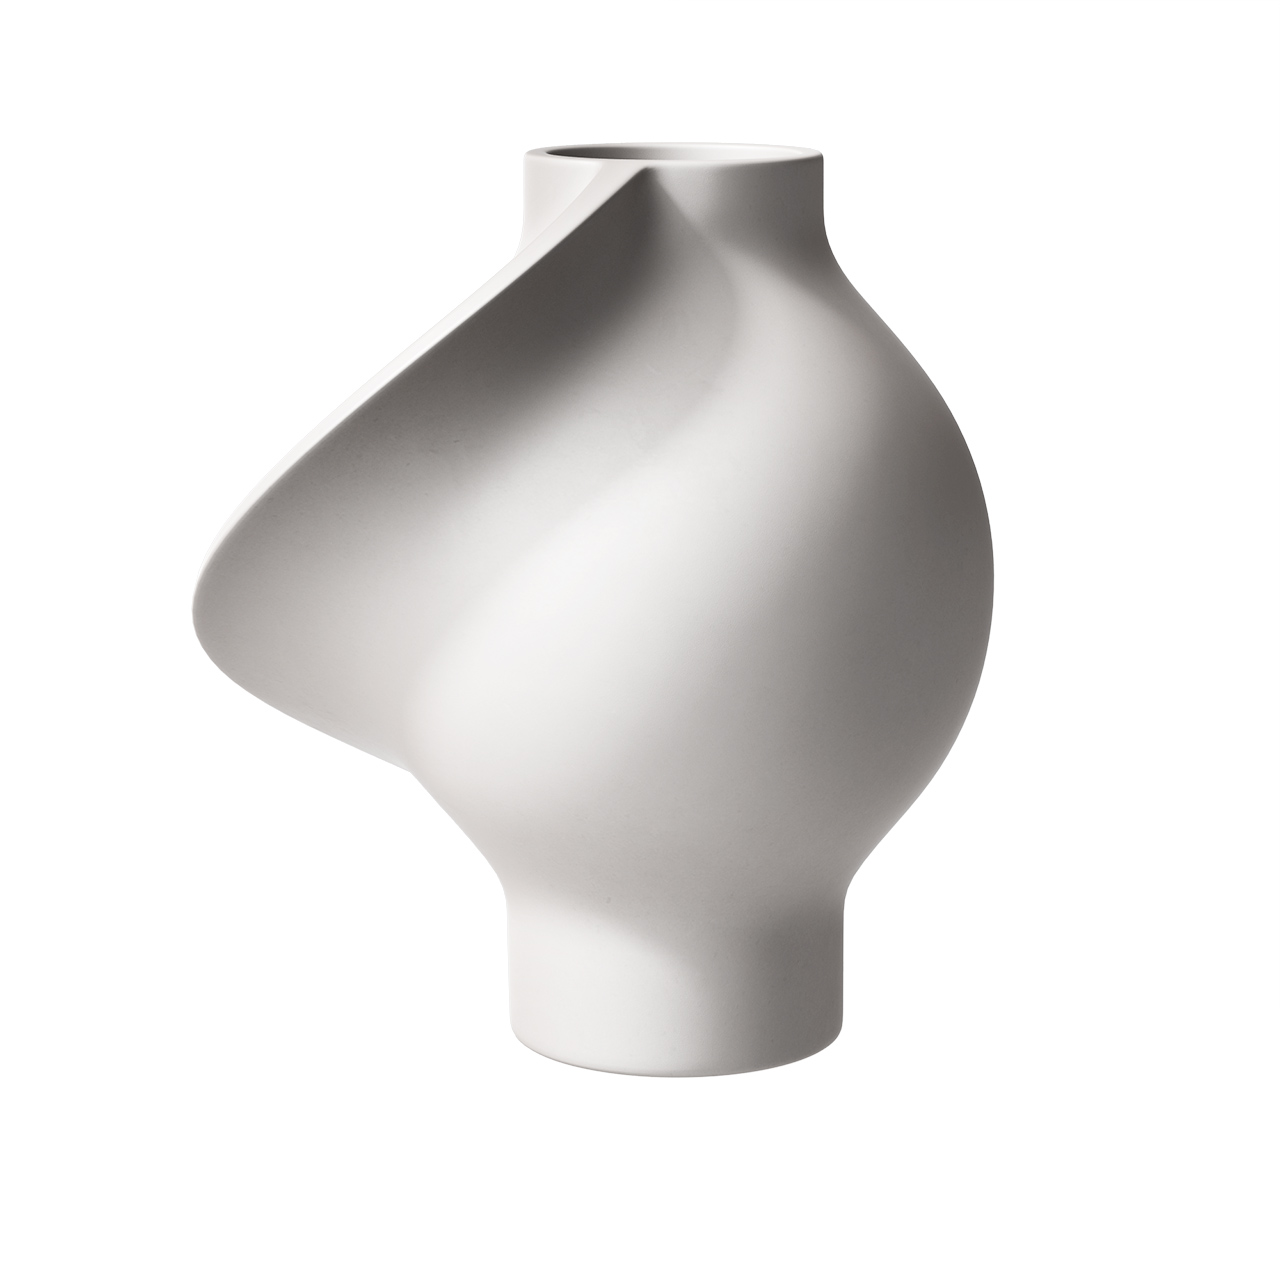 Pirout Vase by Louise Roe